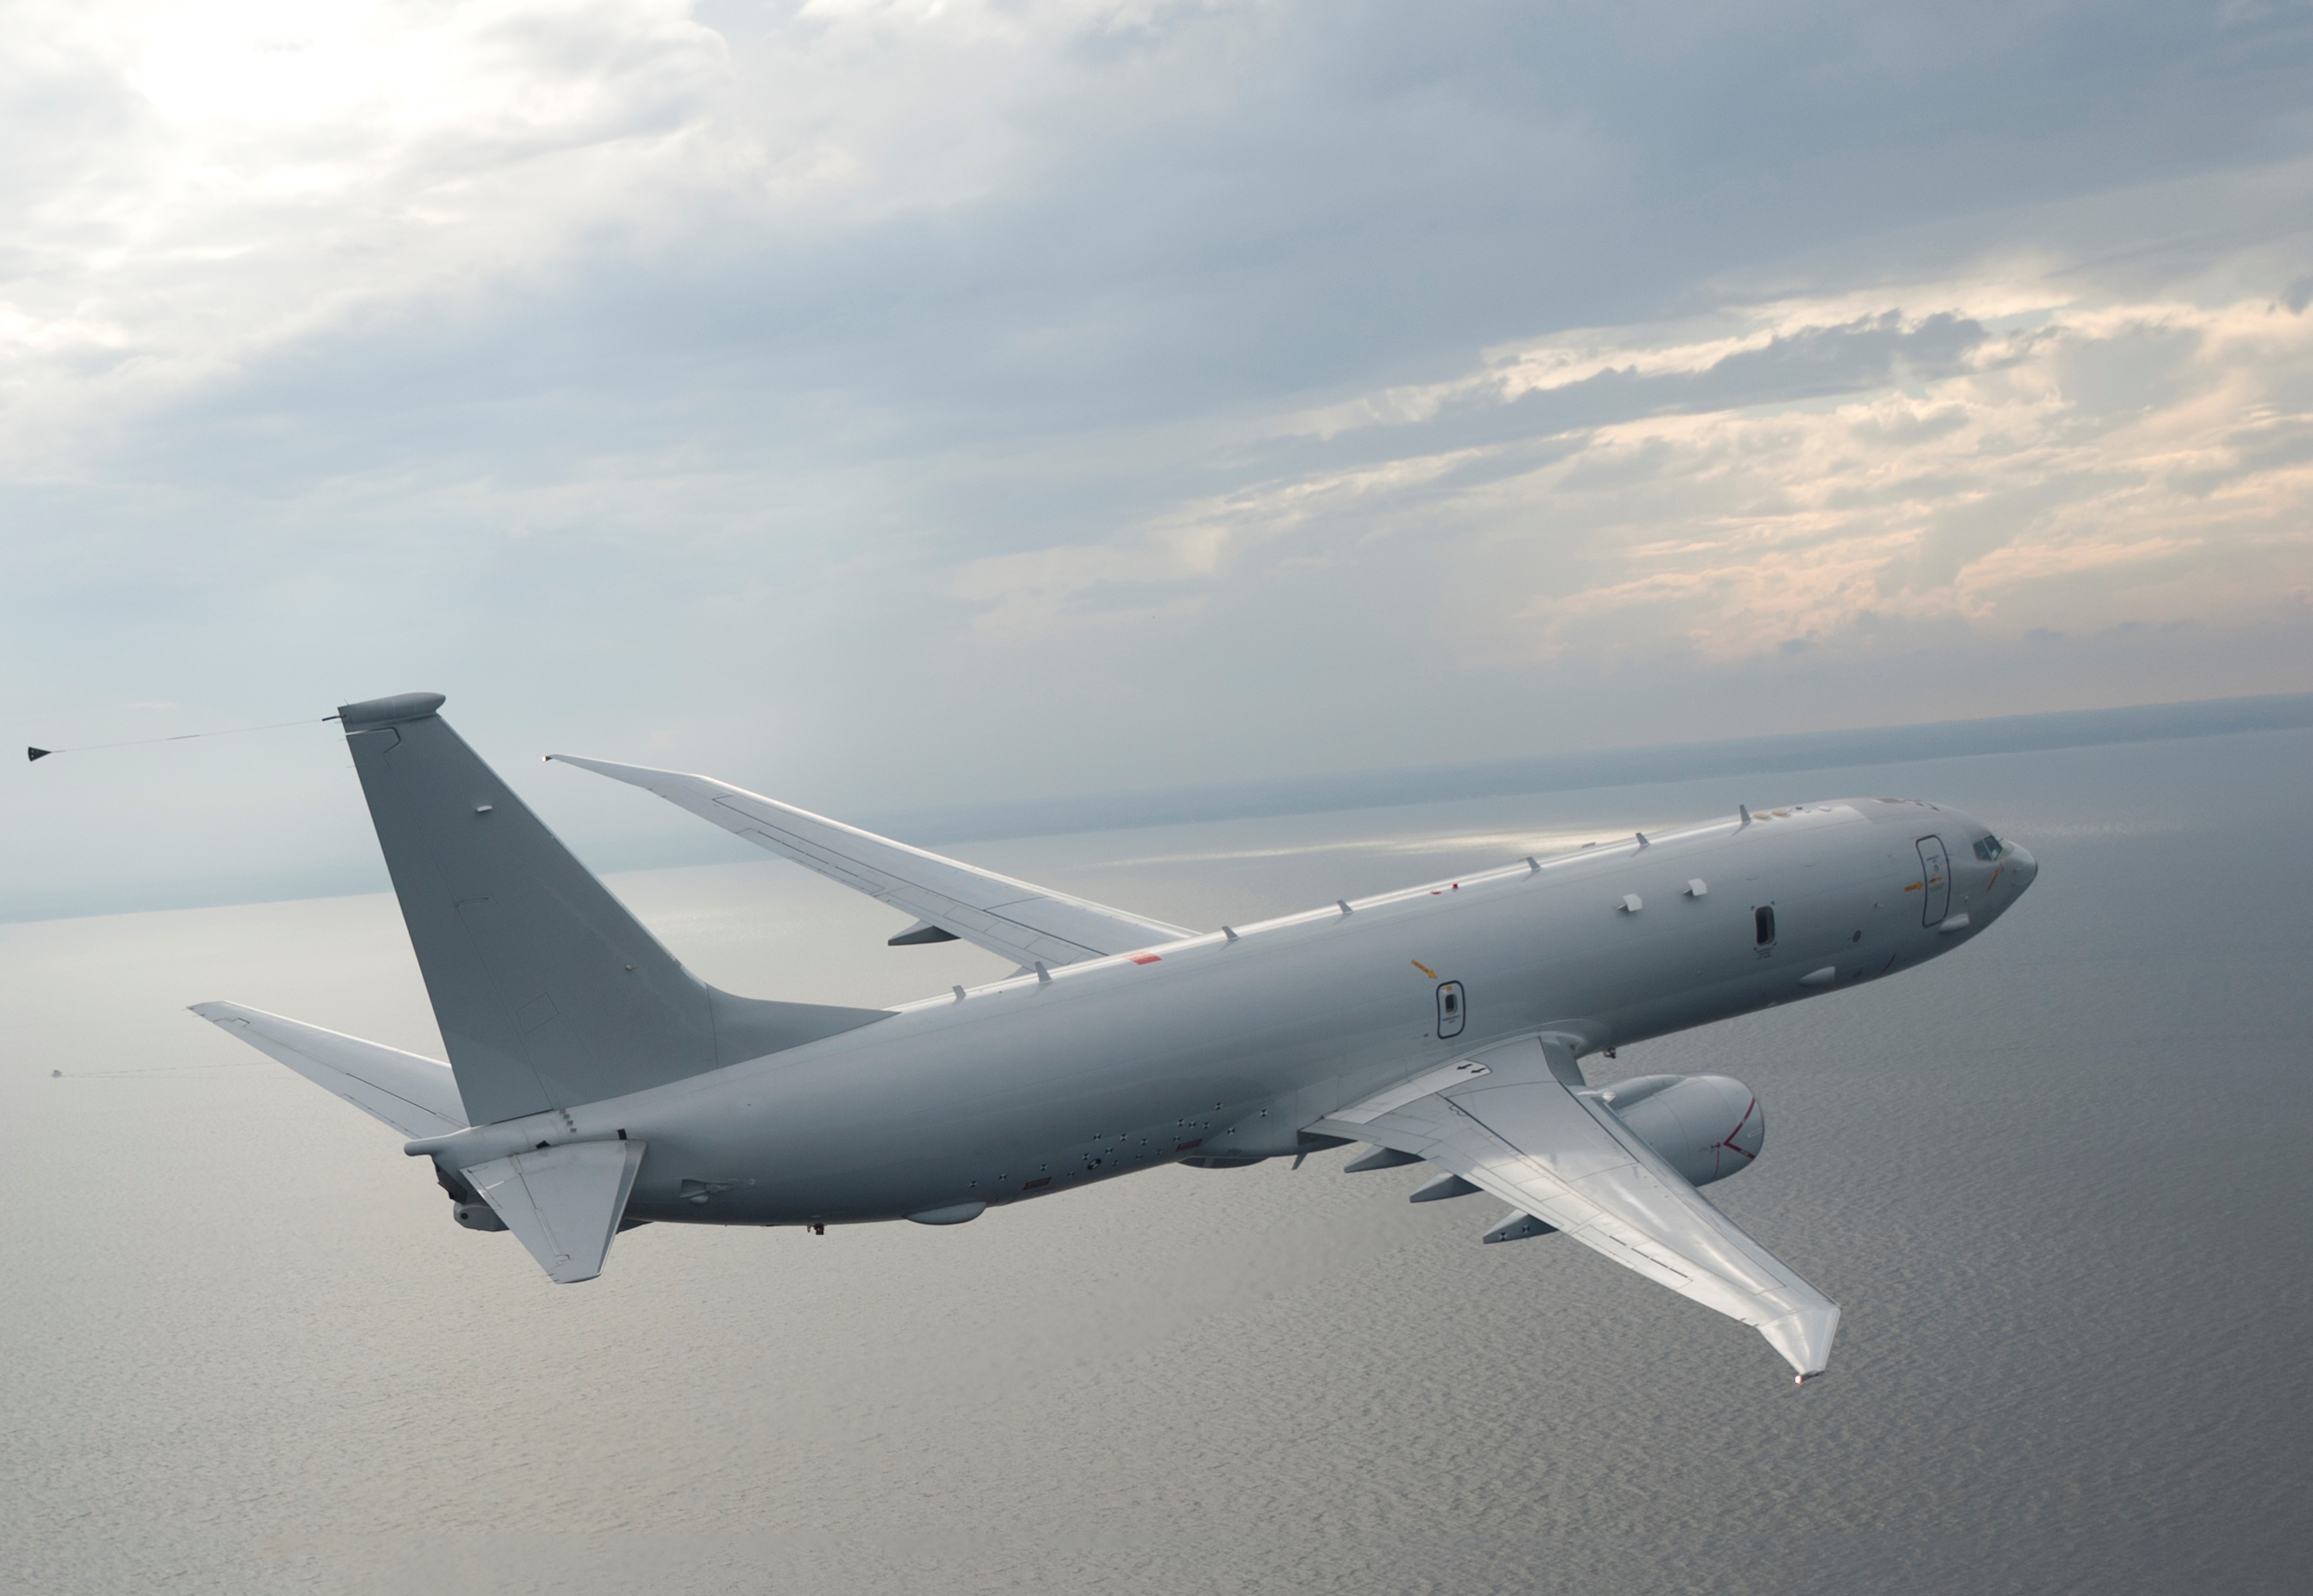 Boeing receives $2.46 billion for P-8A maritime patrol planes for U.S., U.K. and Norway